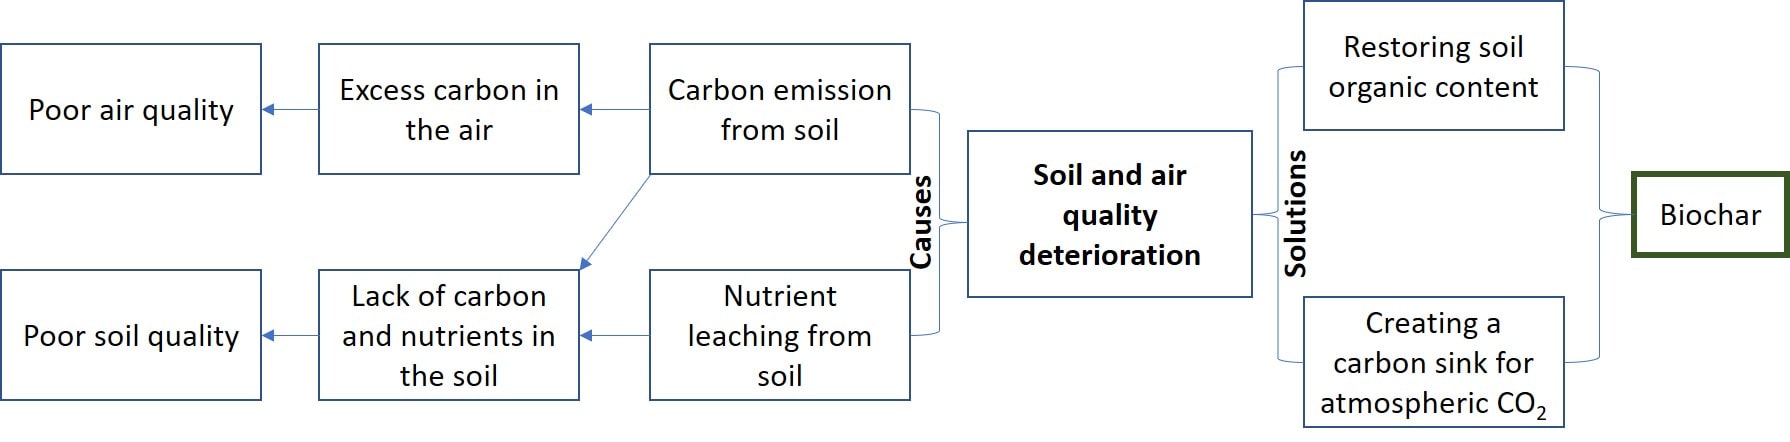 biochar can improve the agricultural sustainability by improving air and soil quality